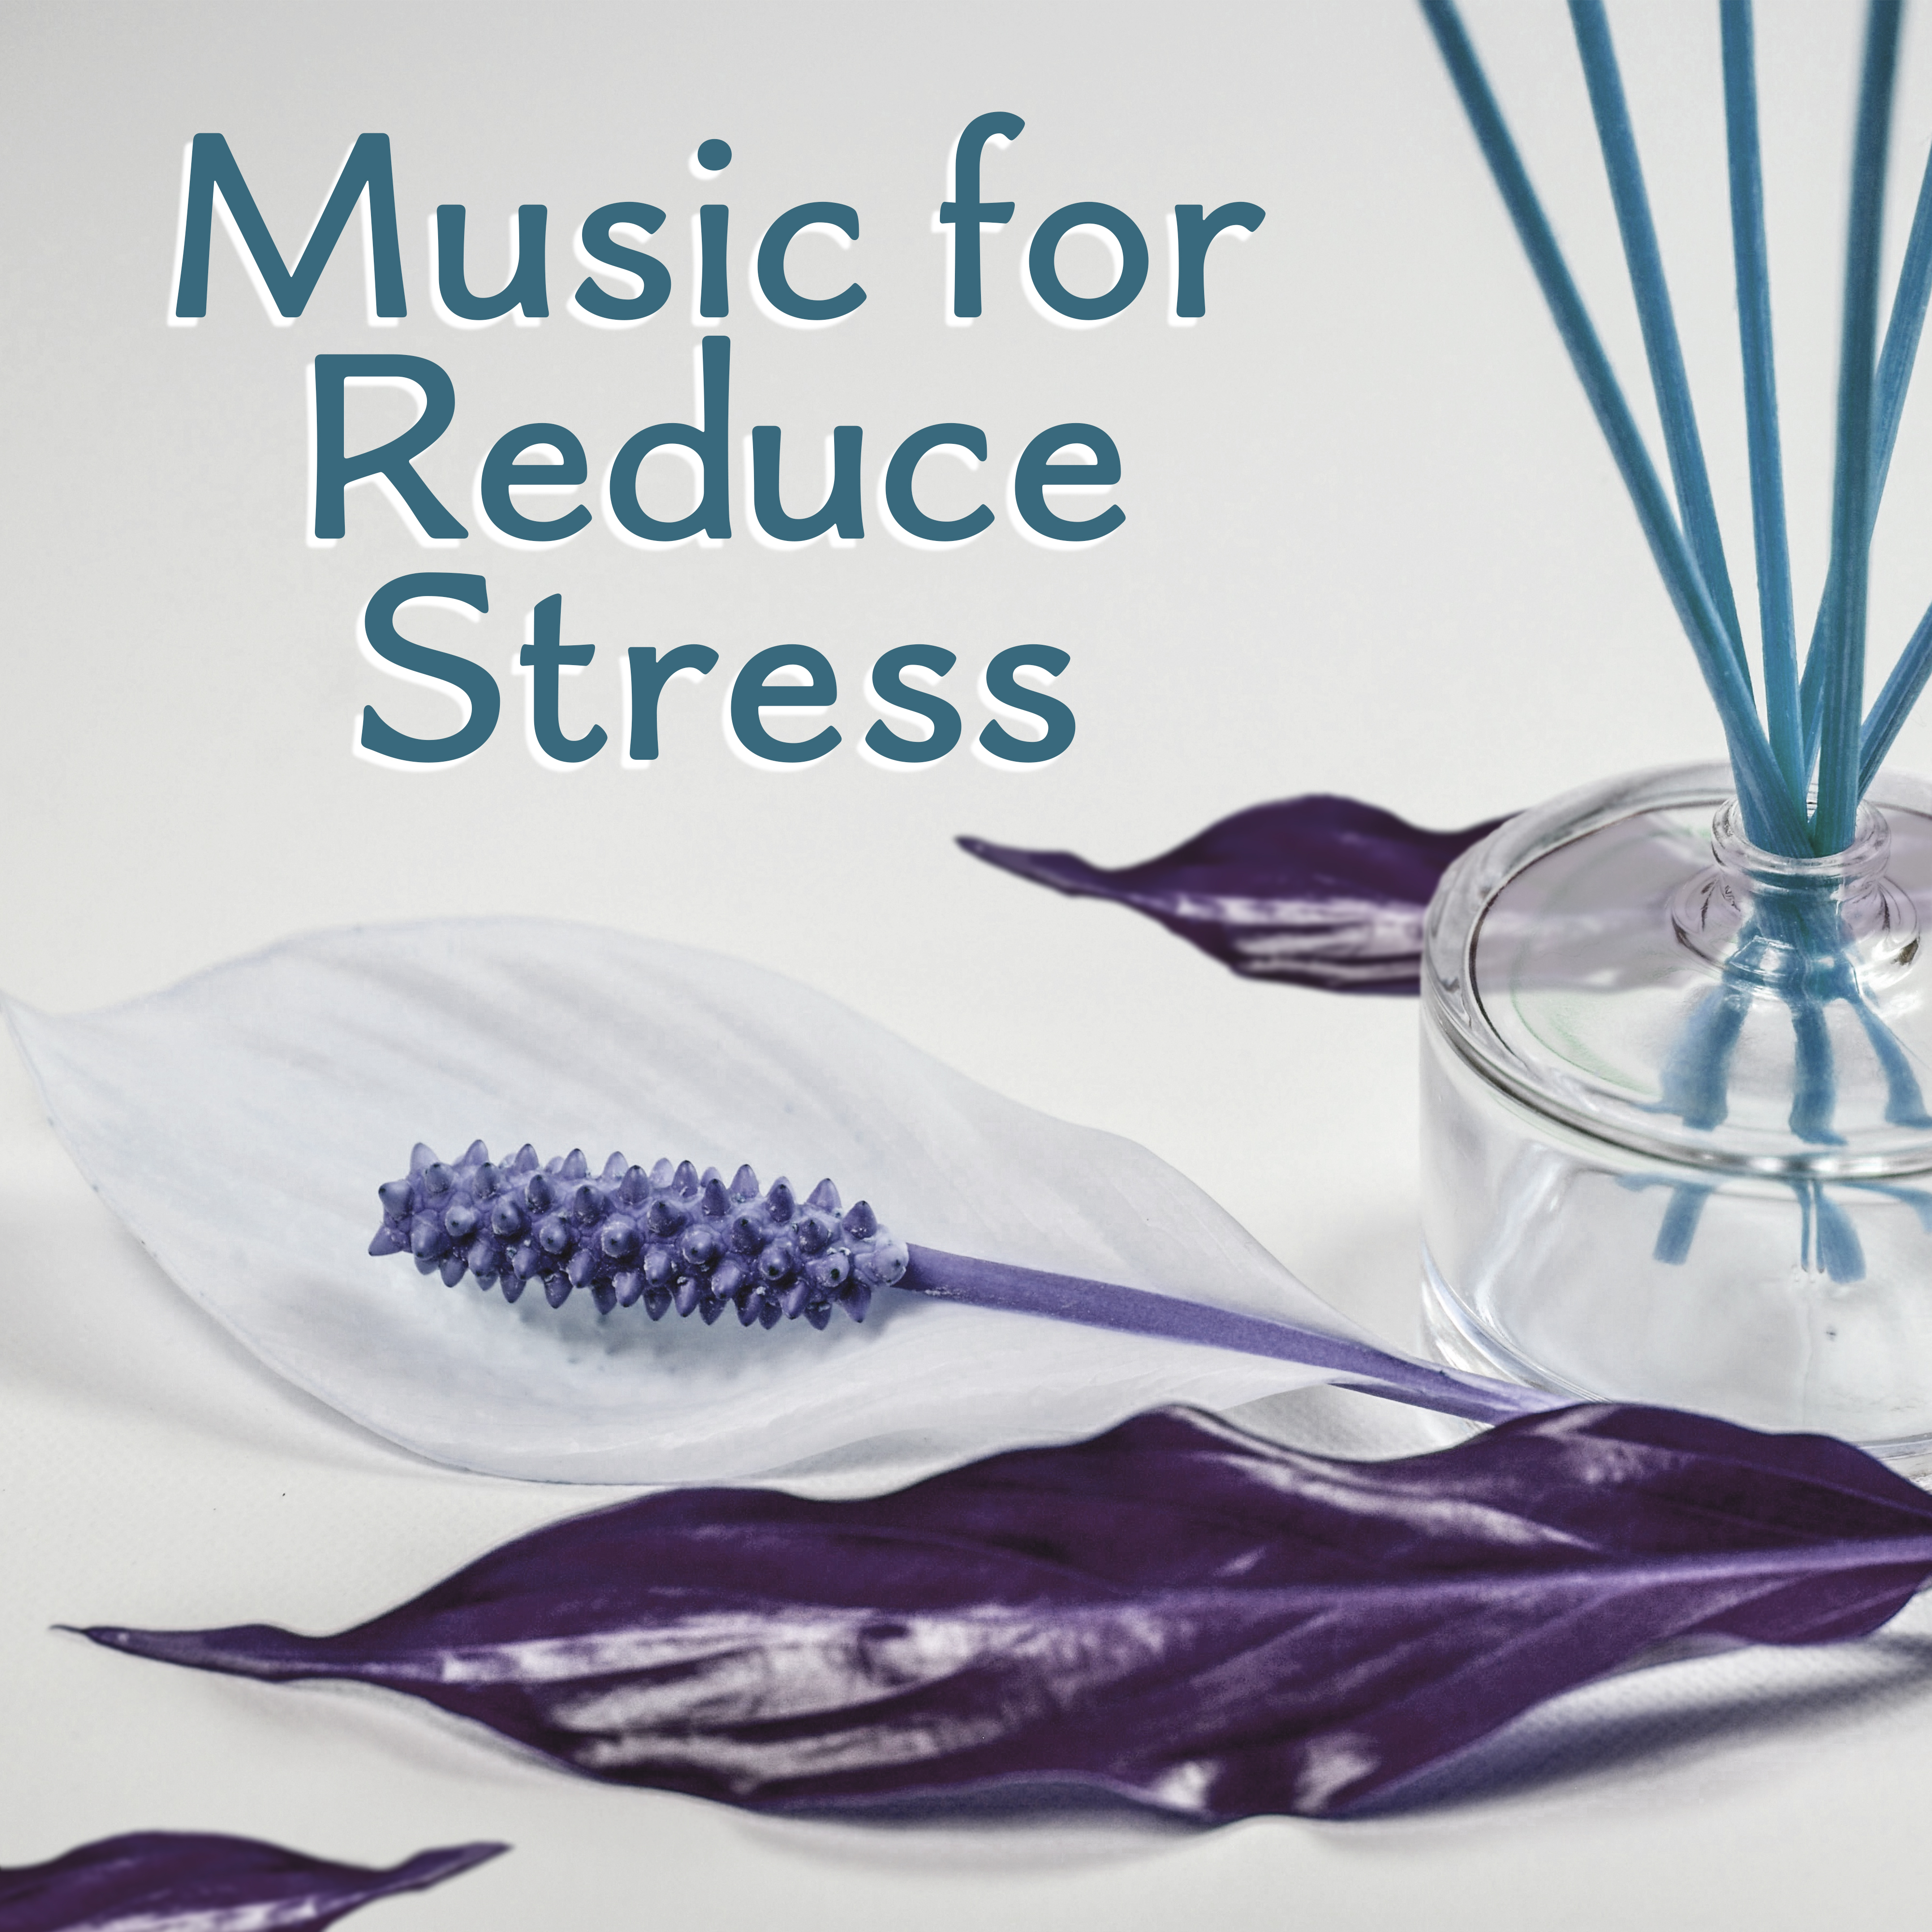 Music for Reduce Stress  Calming Sounds of Nature, Relaxing Music, Rest, Music for Relax, Spa, Deep Meditation